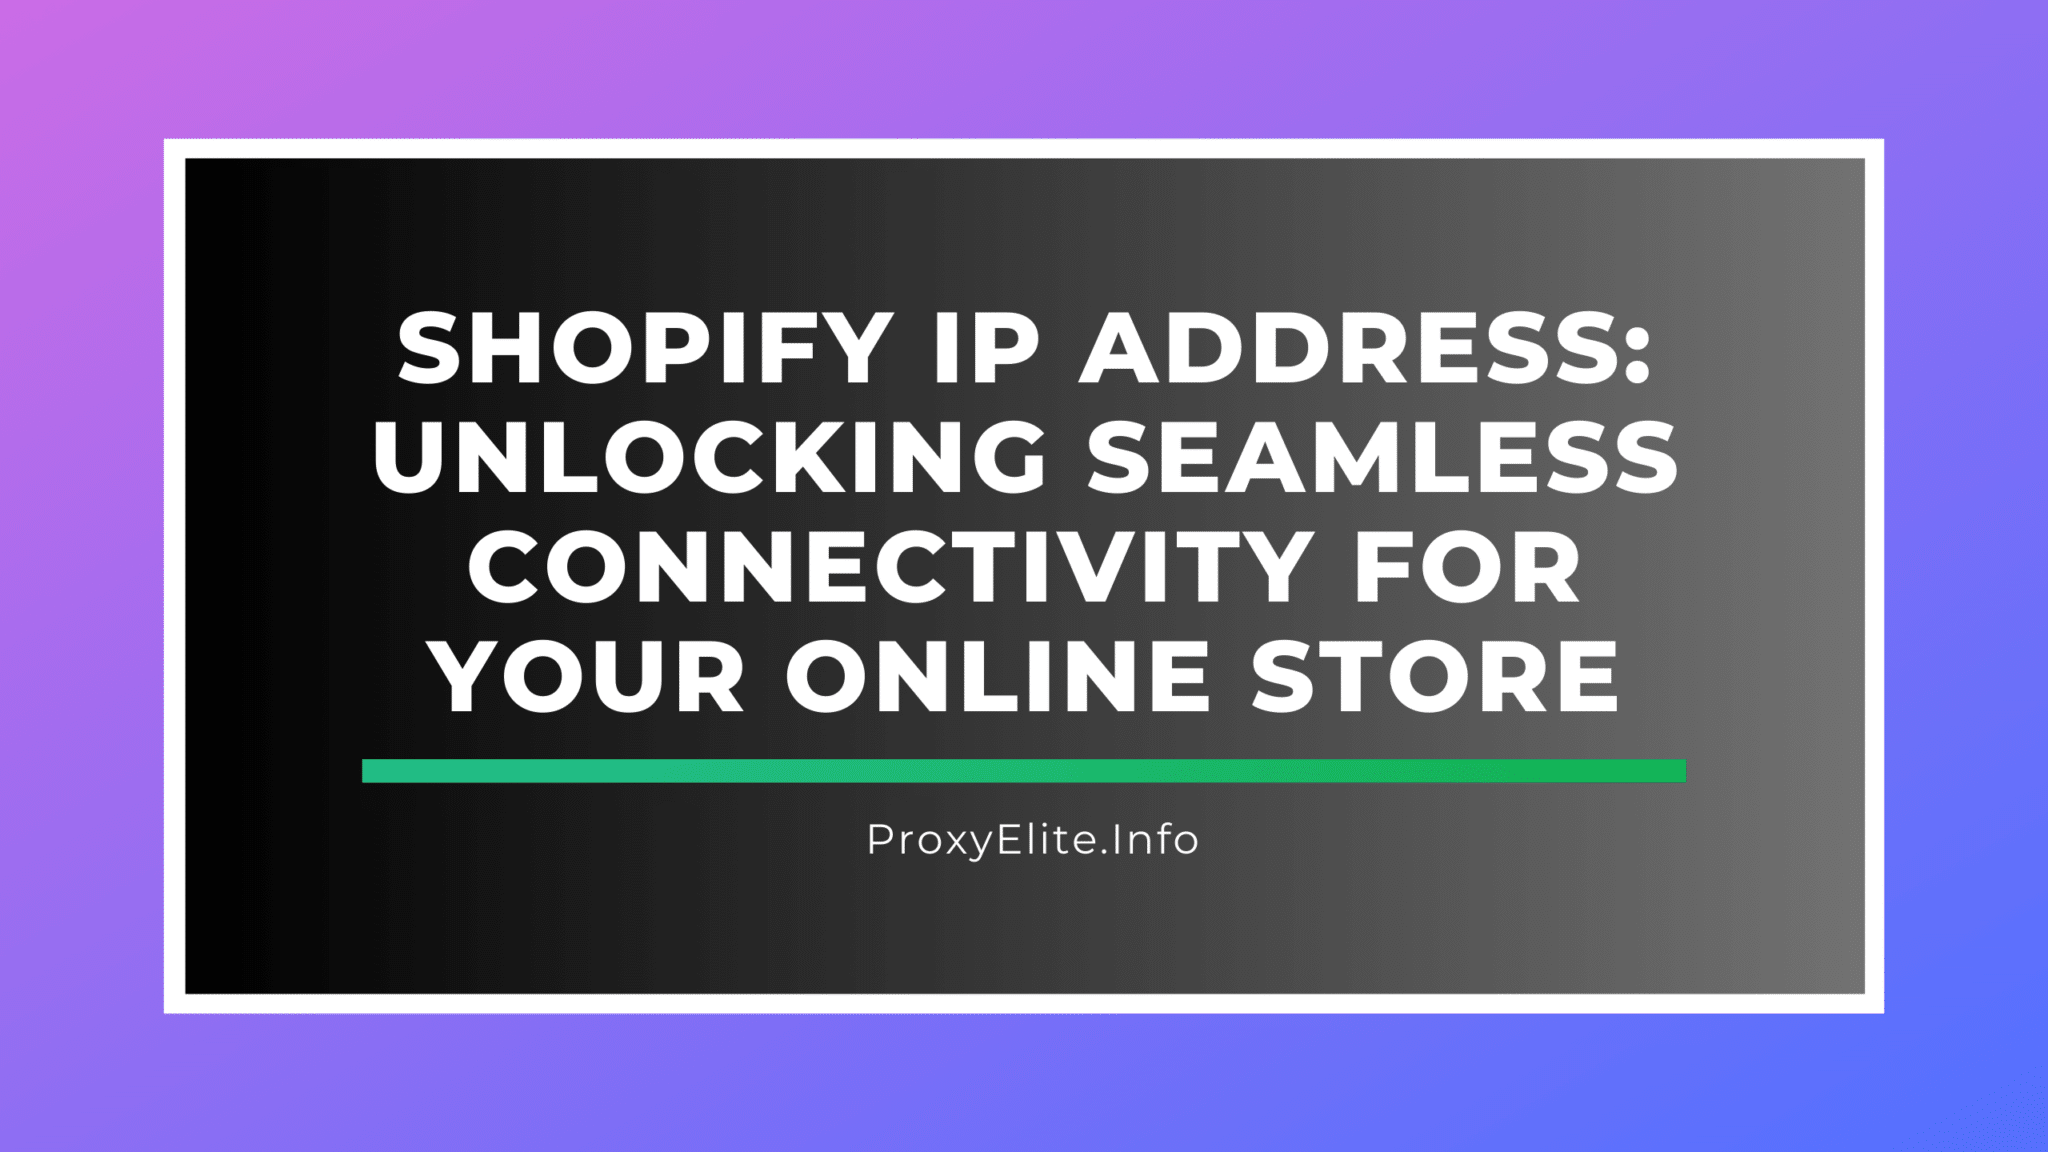 Shopify IP Address: Unlocking Seamless Connectivity for Your Online Store